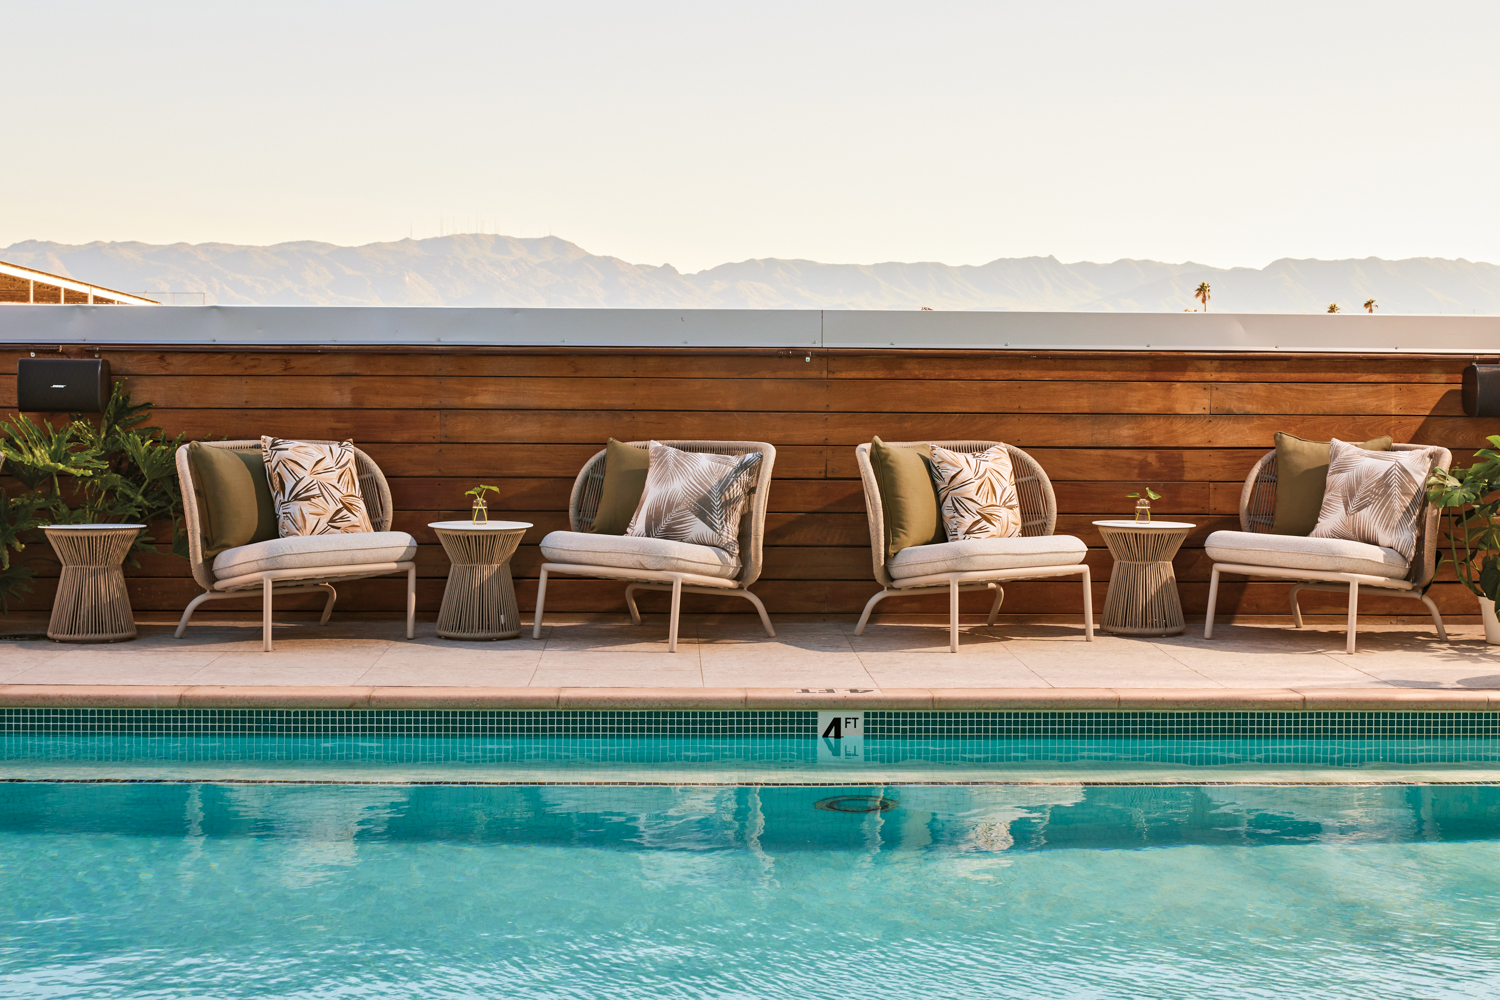 Rooftop pool lounge Eden lined with chairs and side tables overlooking mountain views